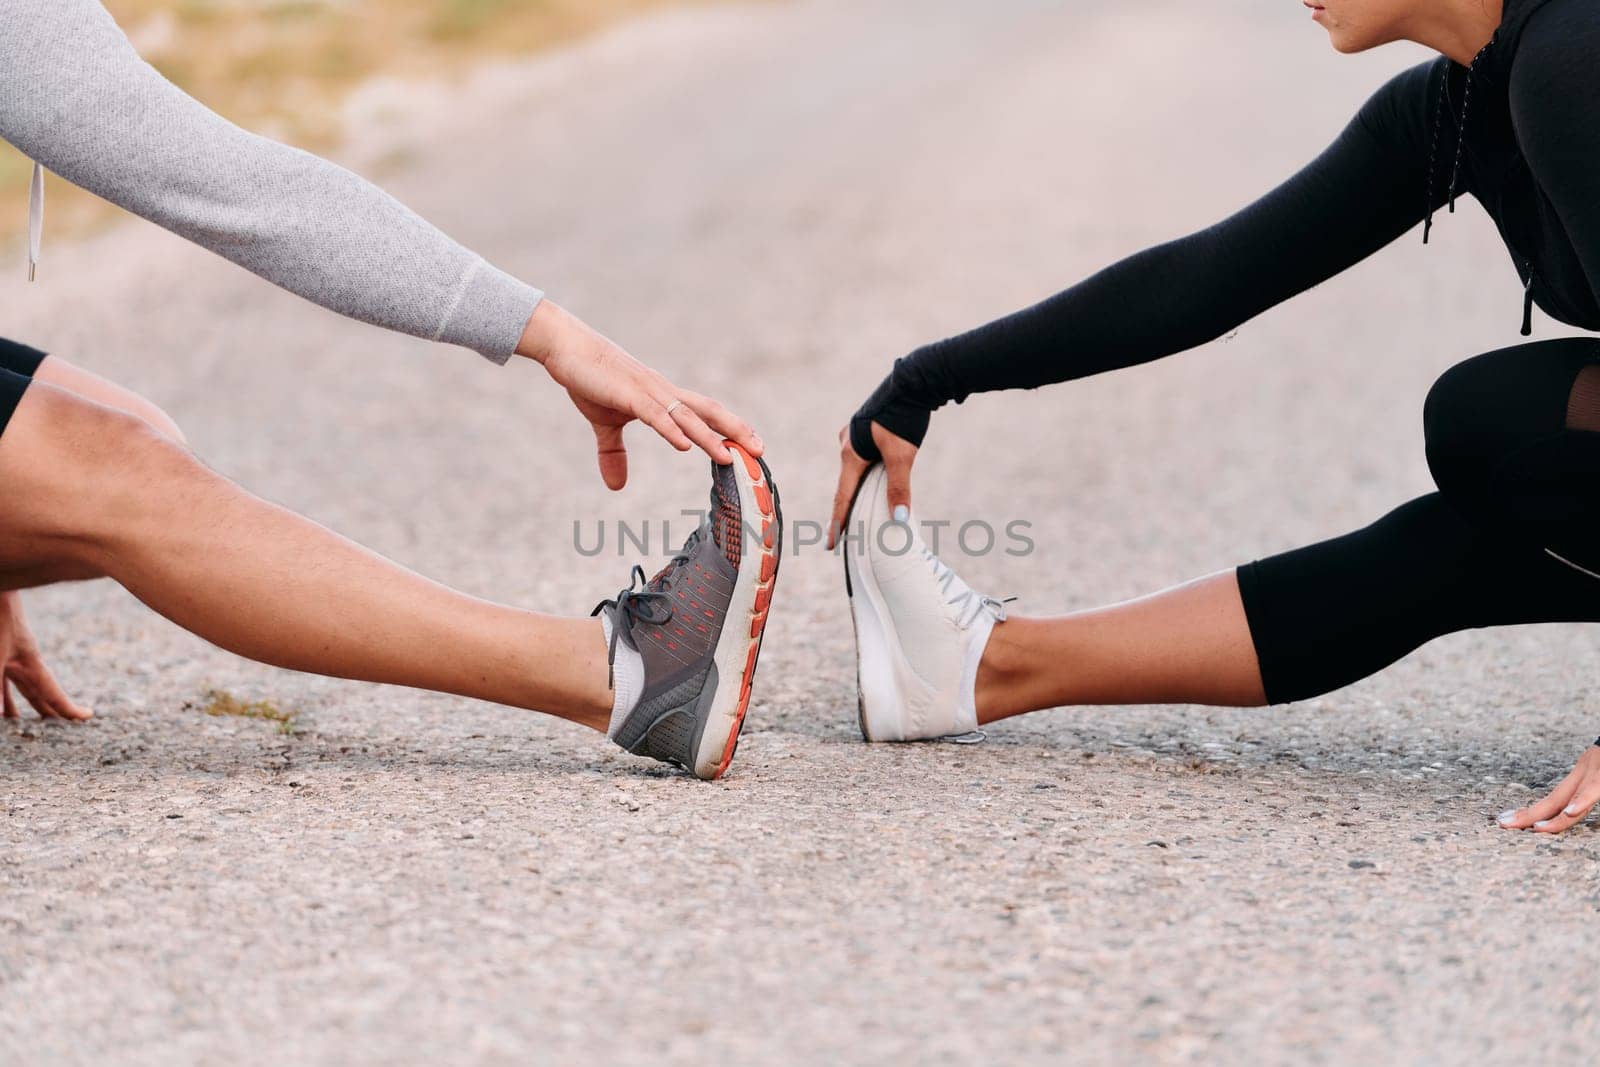 A Romantic Couple Stretching Down After a Run by dotshock